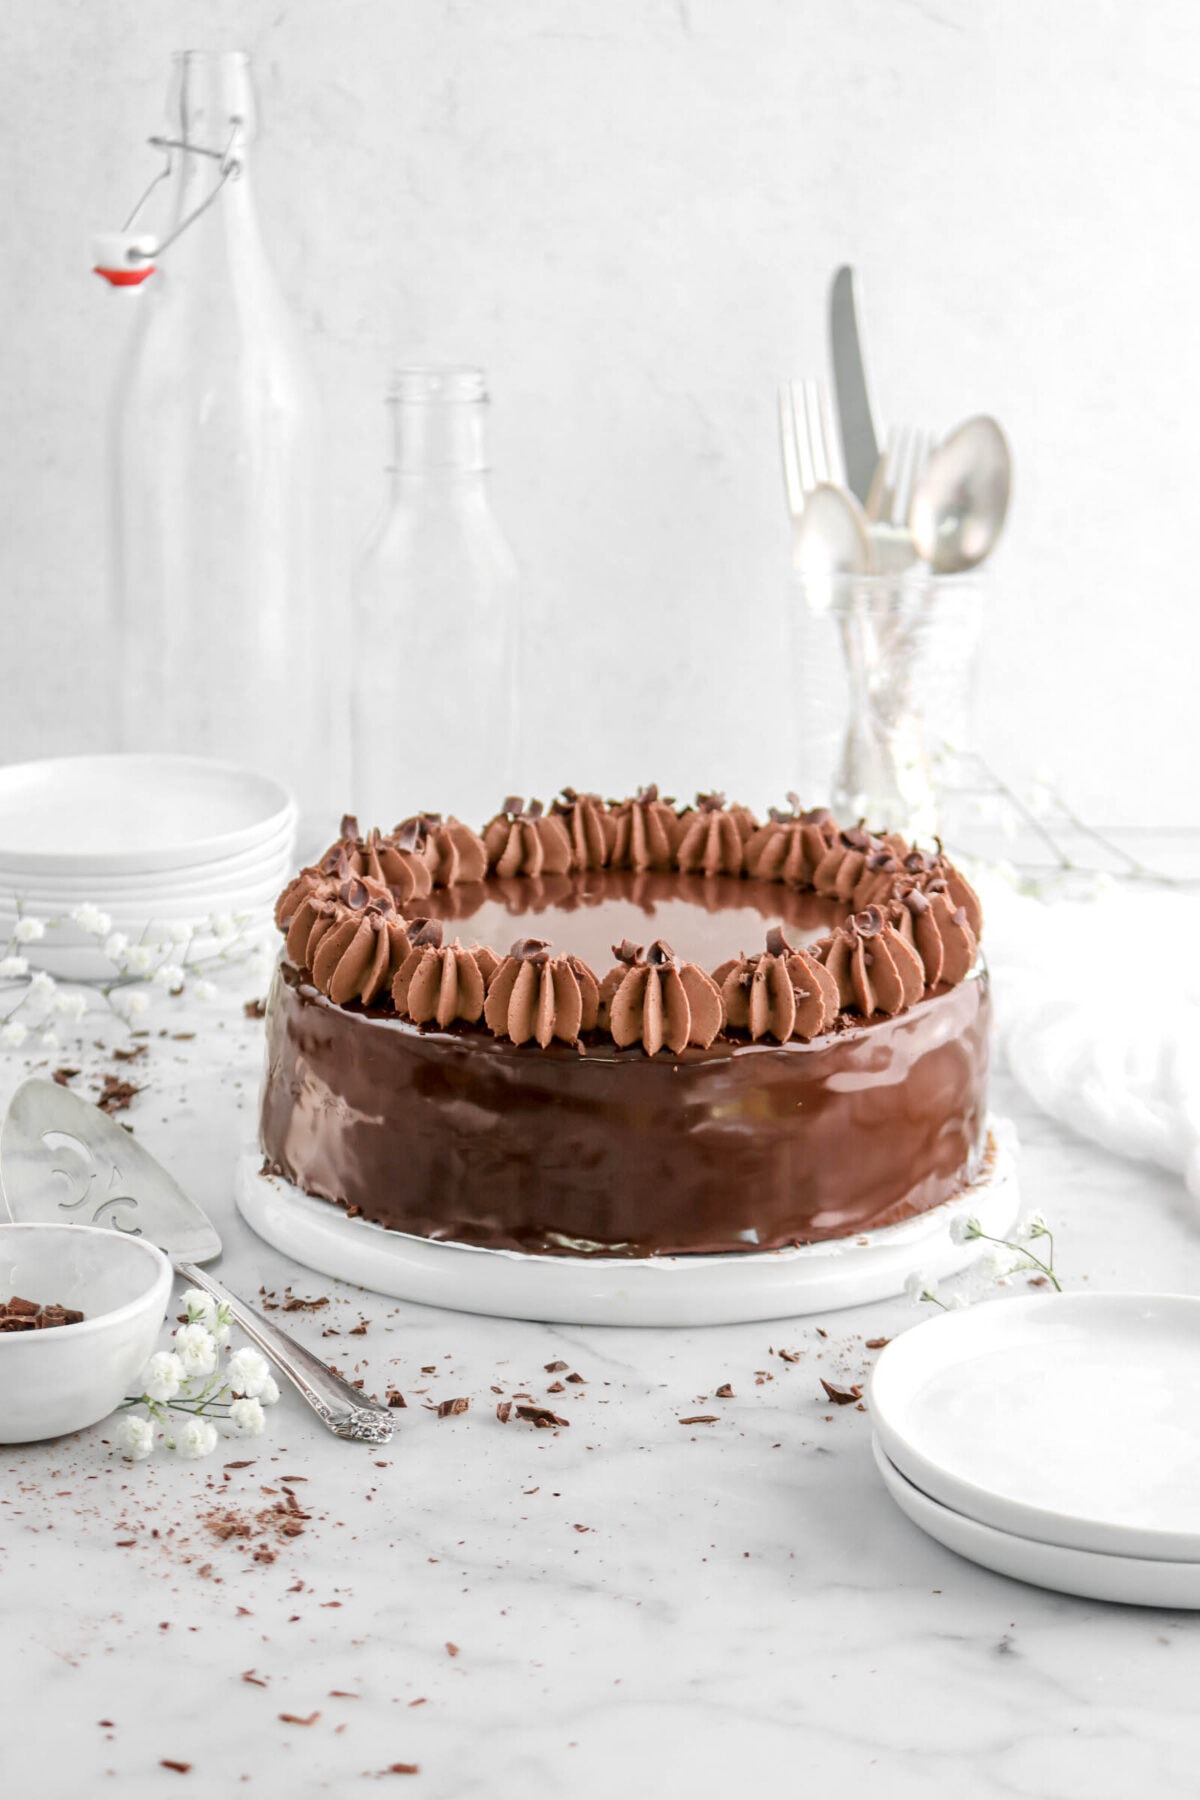 front shot of chocolate mousse cake with mirror glaze on upside down white plate with white flowers and chocolate curls around, stack of white plates, empty glasses, and utensils behind.